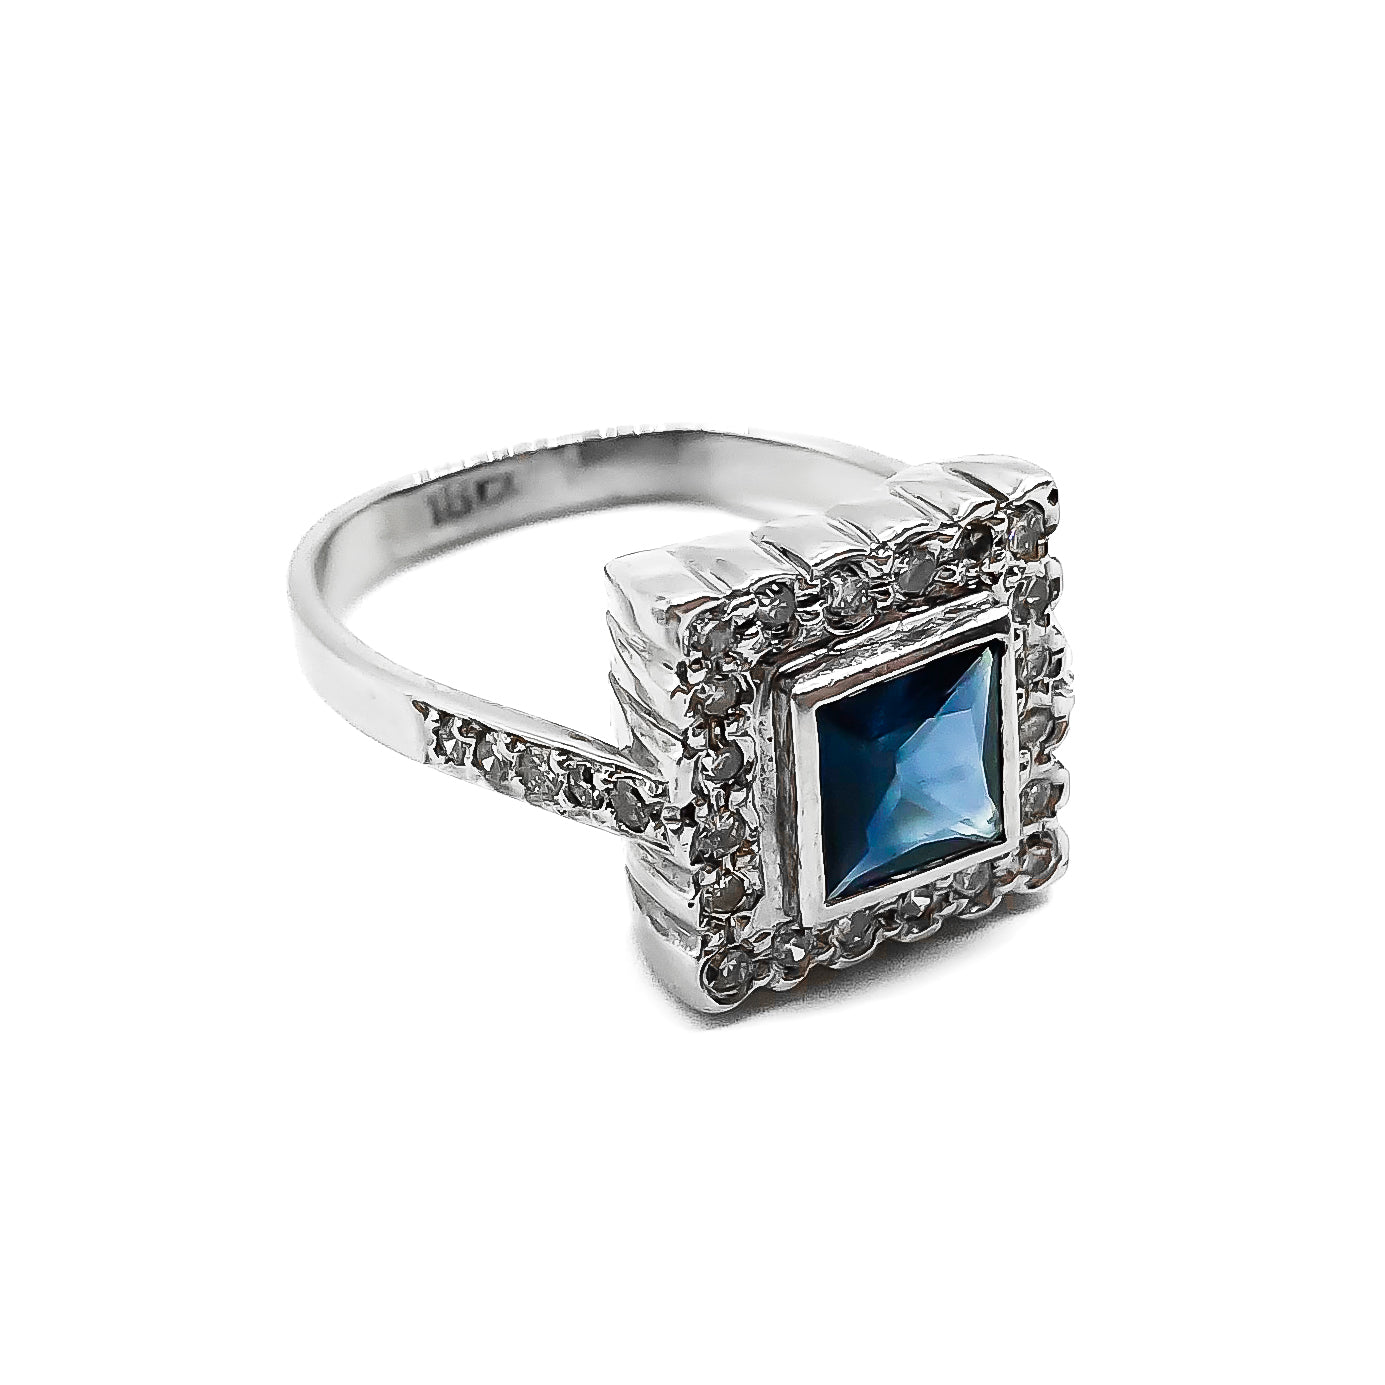 Stunning Art Deco style 18ct white gold ring with a square sapphire surrounded by twenty diamonds and ten smaller diamonds on the shank.